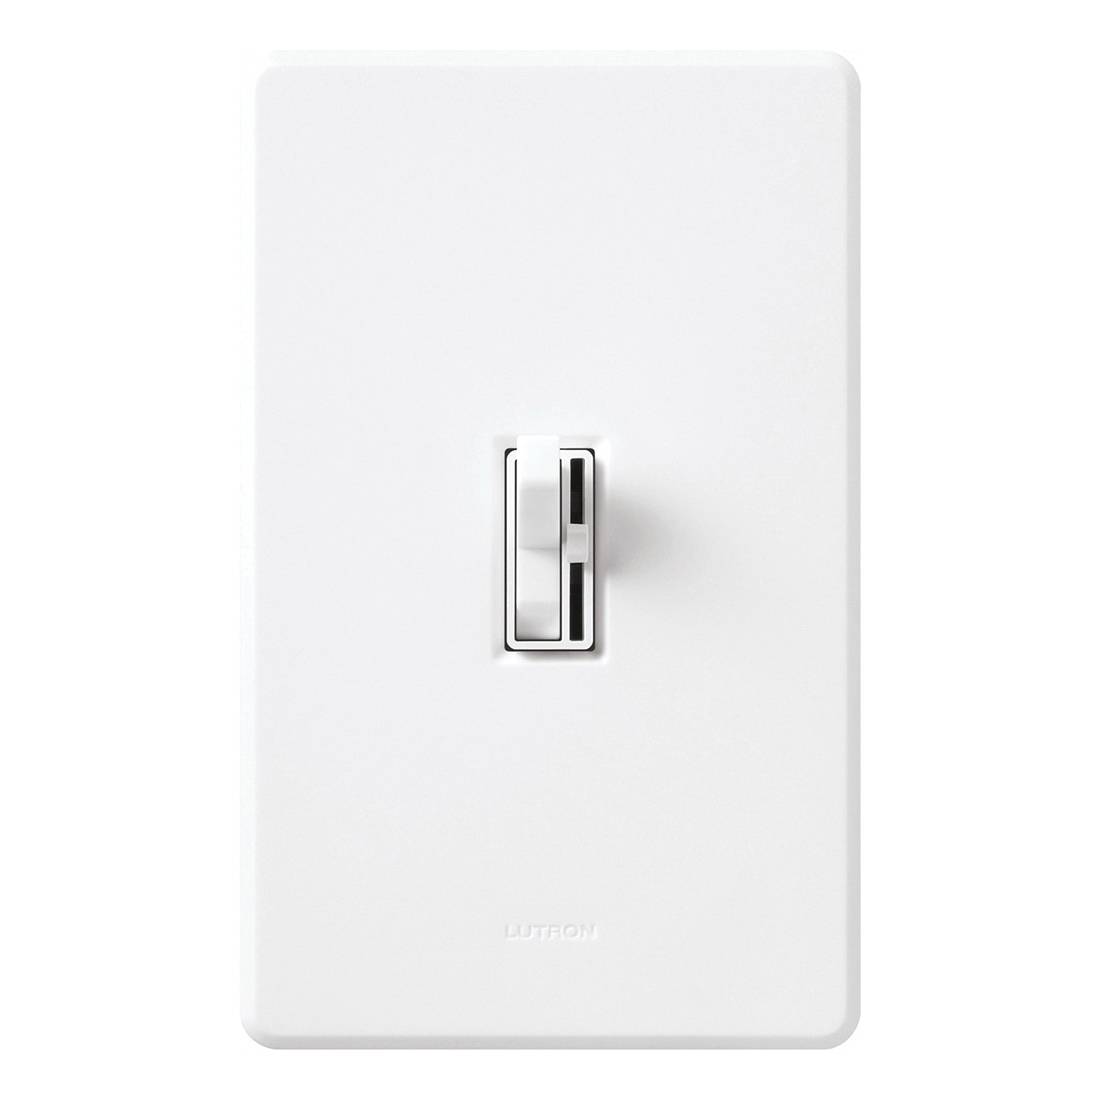 Lutron® Ariadni® Toggler® C.L® AYCL-153PH-WH 3-Way Traditional Style Dimmer Switch, 120 VAC, 1 Pole, Slide-to-Bright/Dim Operation, White